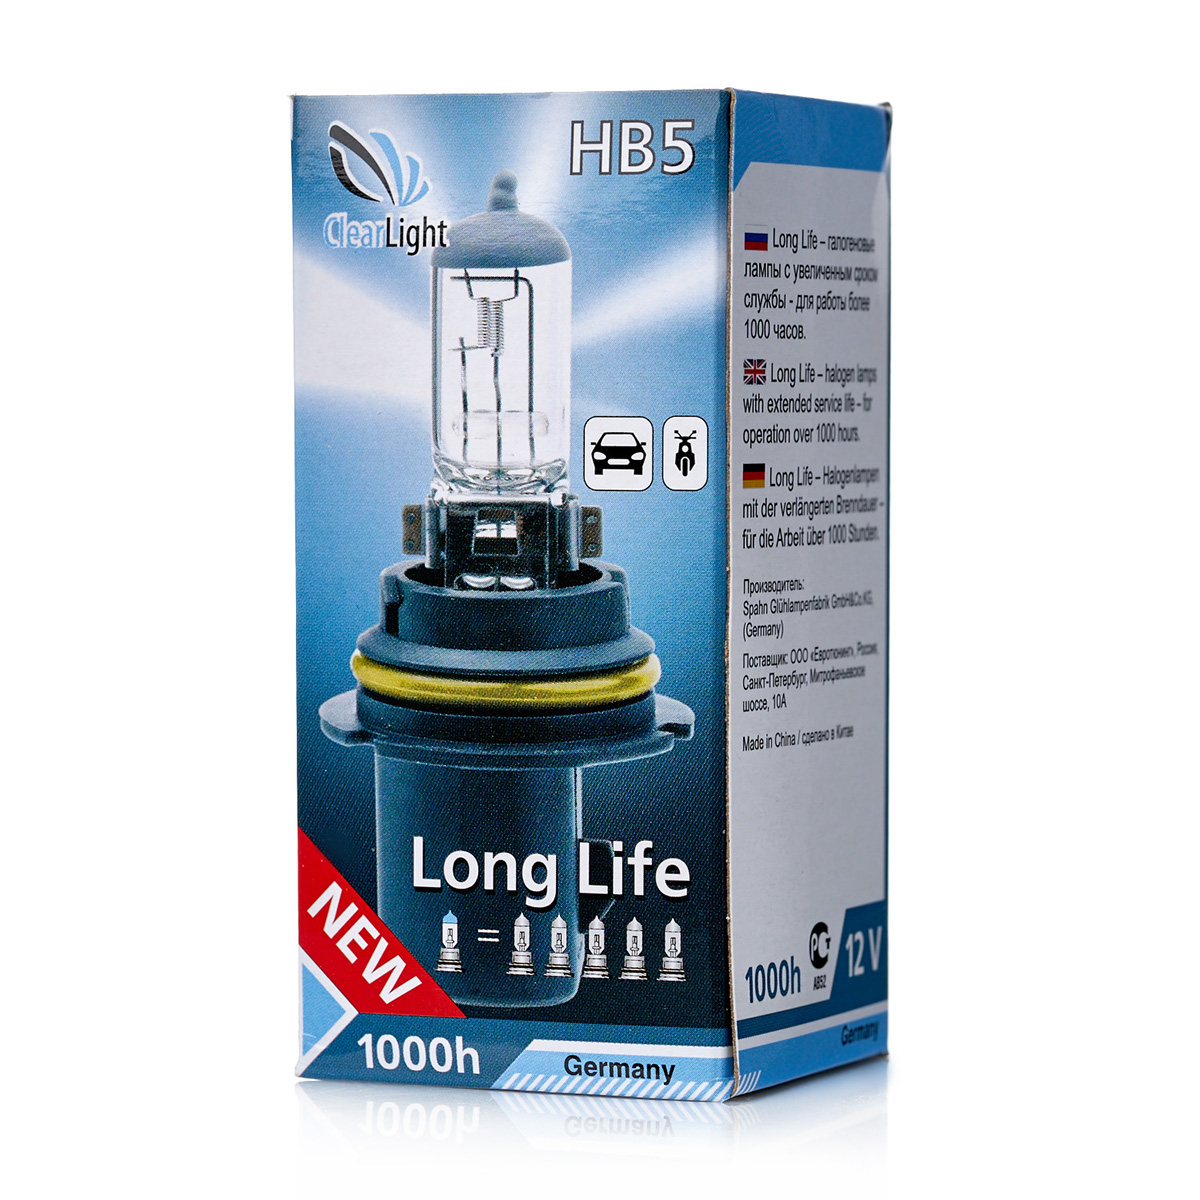 Long life лампа. Clearlight ml9007ll. Clearlight - hb4 - 12v-51w Longlife. Clearlight XENONVISION hb5. Clearlight mlh4ll лампа галоген" long Life h4" 12в 60/55вт.